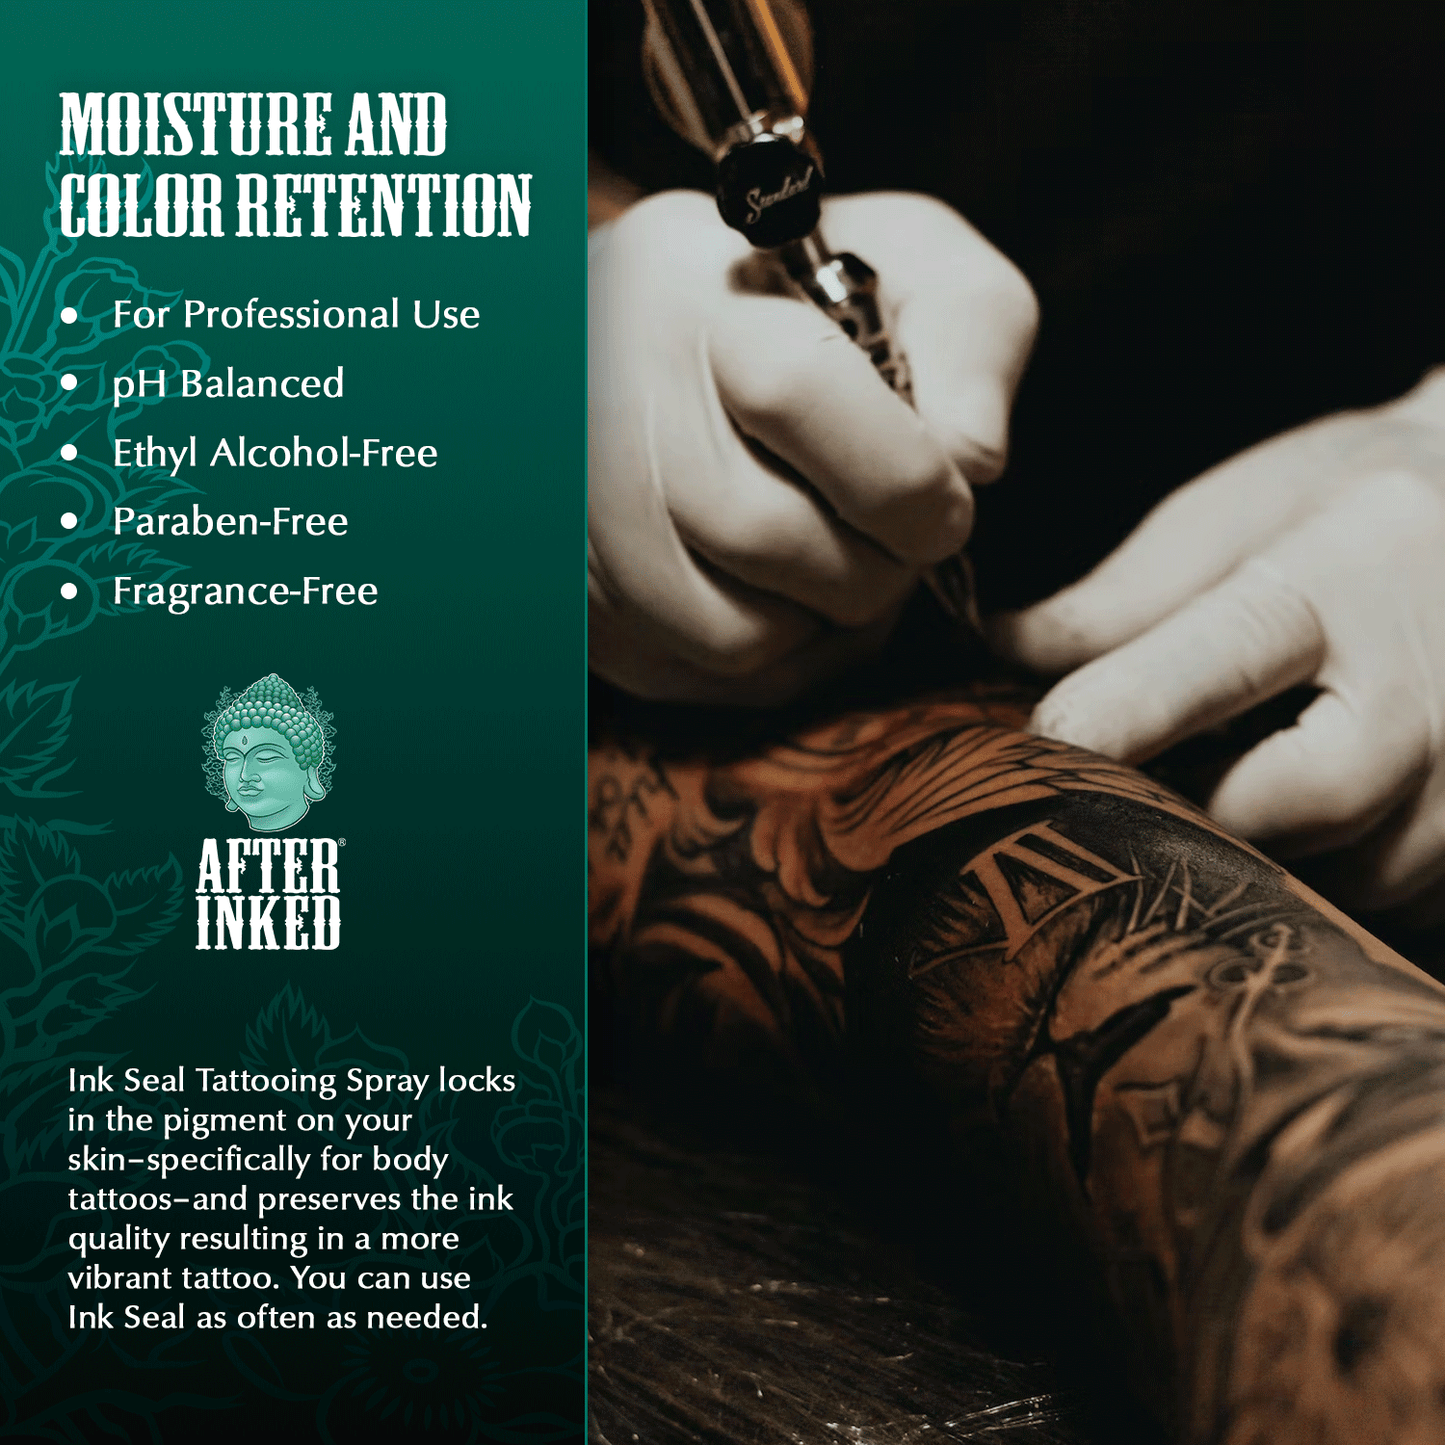 Moisture and color retention. For professional use. pH balanced. Ethyl alcohol-free/ Paraben-free. Fragrance-free. Ink Seal tattooing spray locks in the pigment on your skin -specifically for body tattoos- and preserves the ink quality resulting in a more vibrant tattoo. You can use Ink Seal as often as needed.